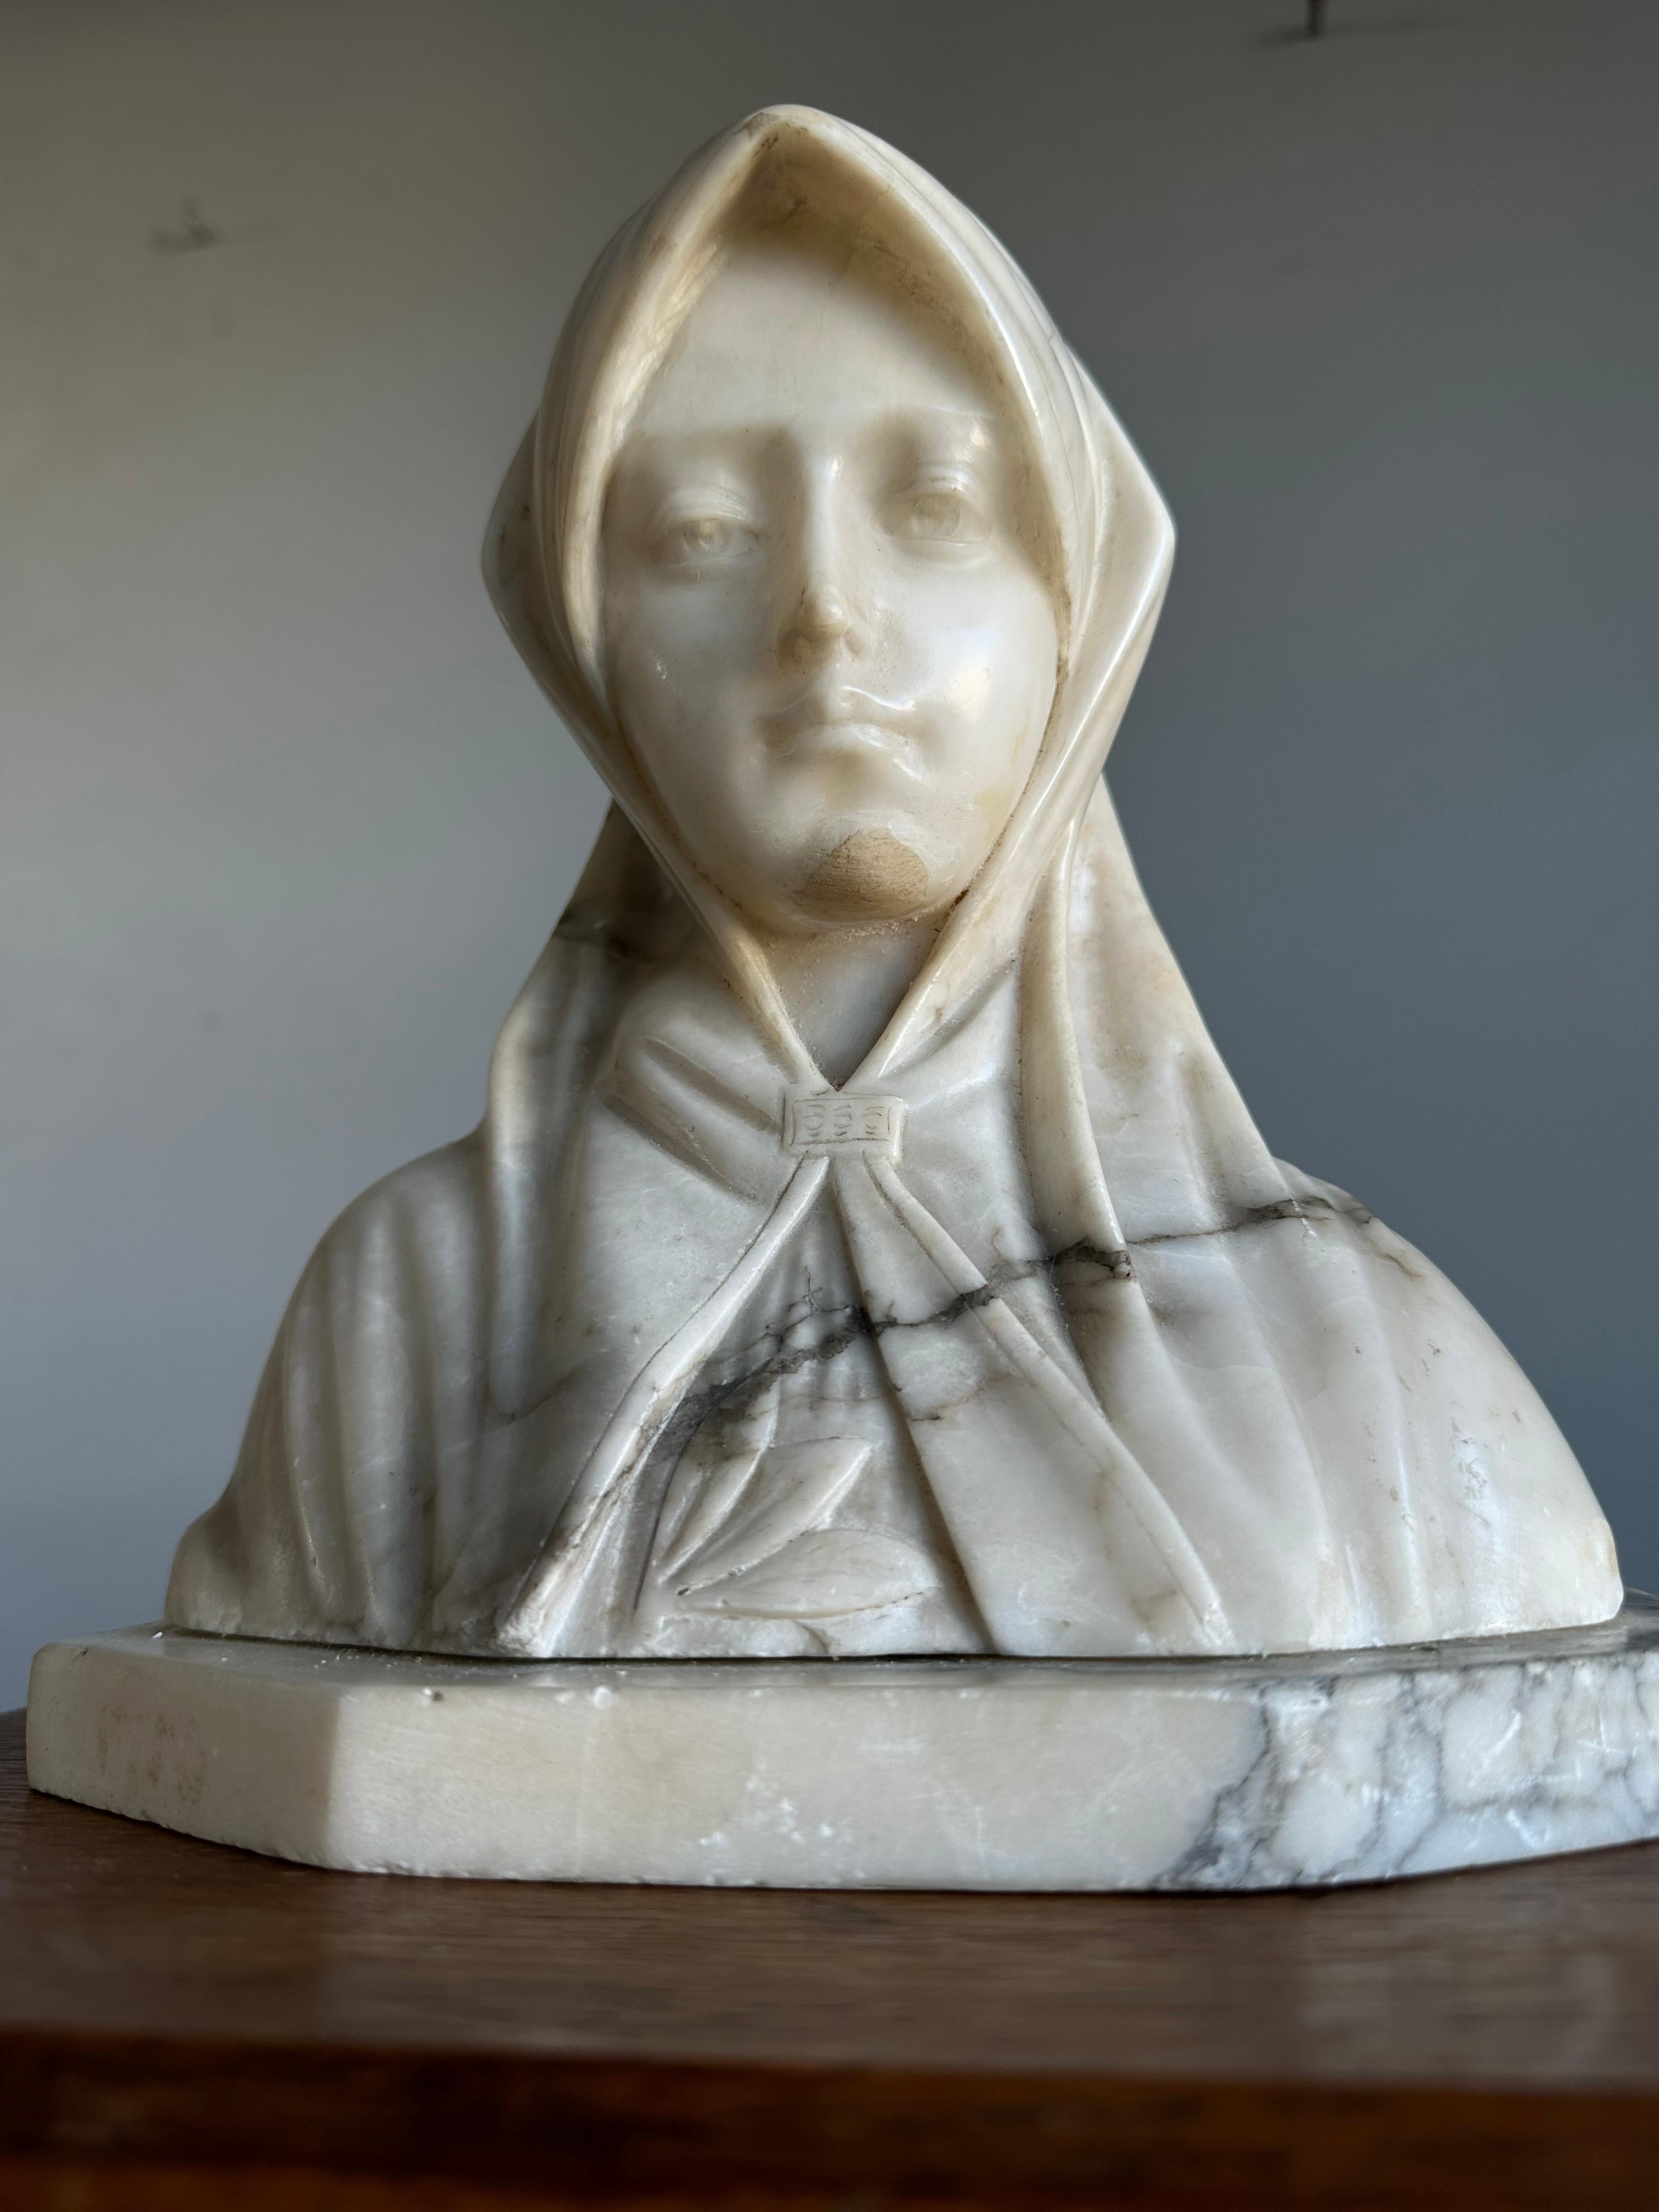 Top quality carved, practical size and used condition sculpture of a serene Saint Clare.

If you are a collector of antique and beautiful materials works of art in general and of religious artefacts in particular then this hand carved, lady Saint